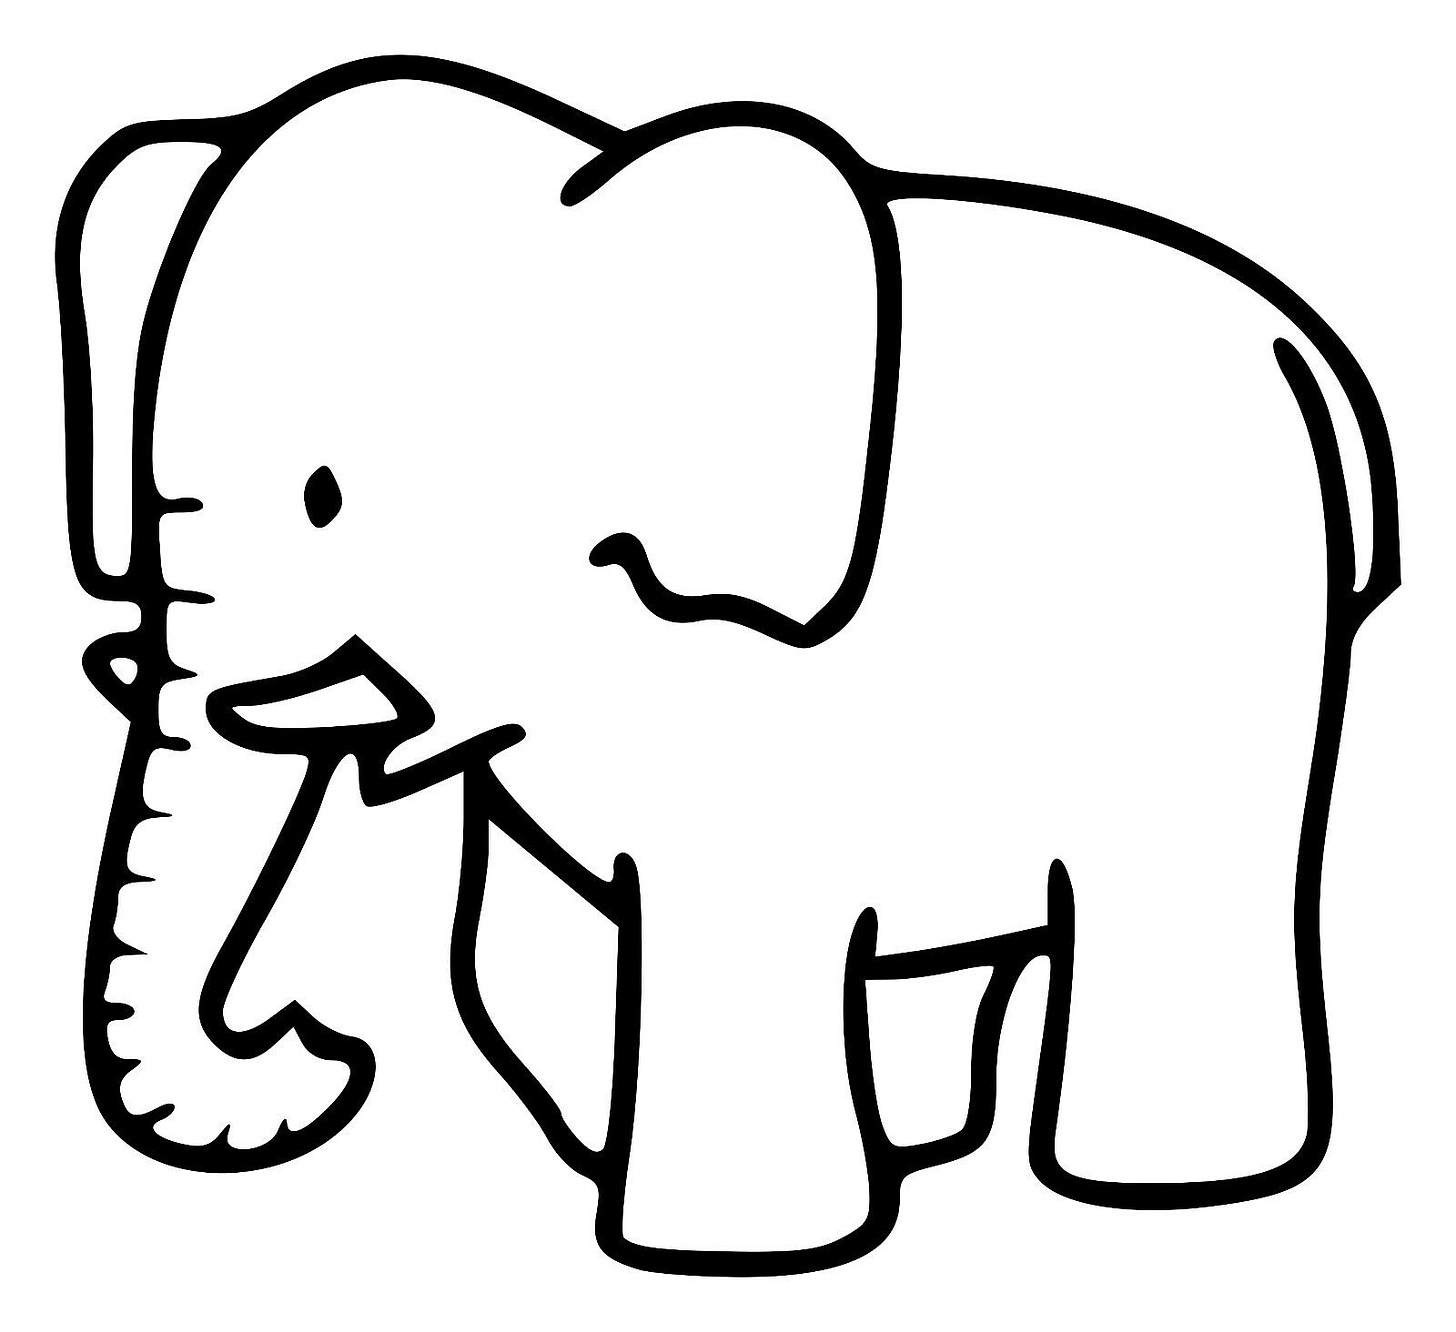 Elephant wall Car/Truck Decal vinyl decal, window, trailer - Picture 1 of 2